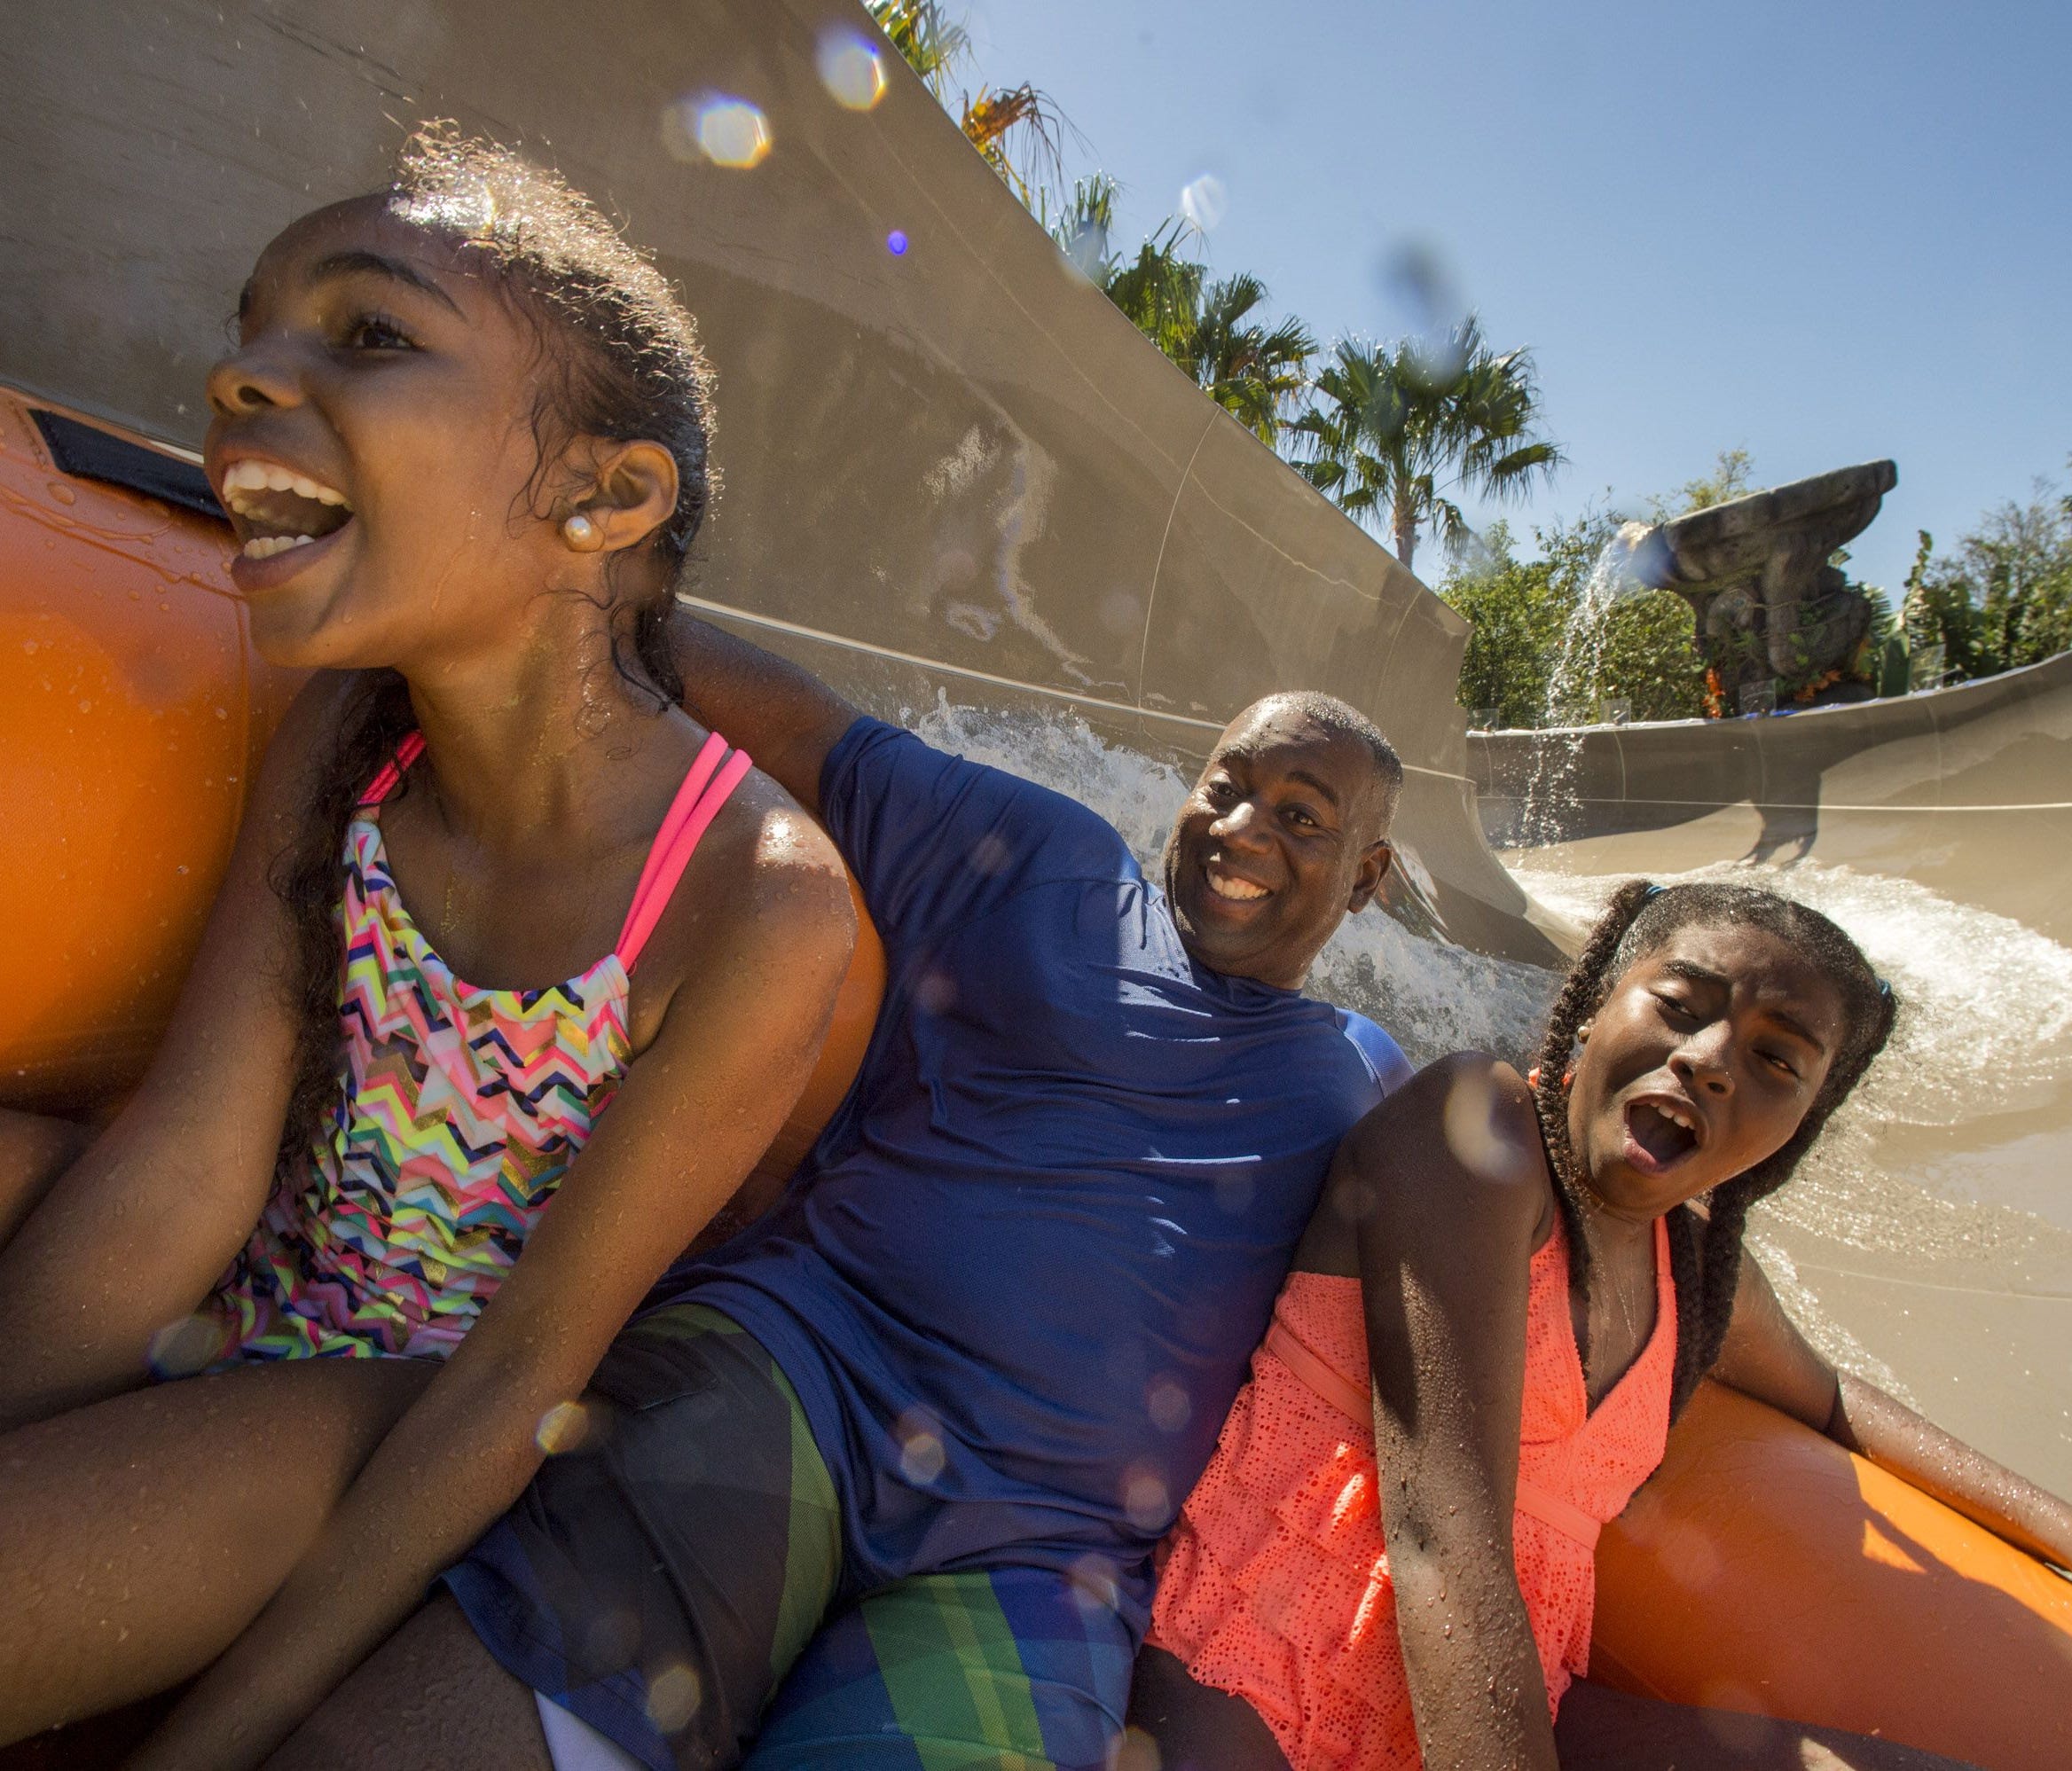 Miss Adventure Falls is a new family raft attraction taking guests of all ages a fast-paced waterslide journey at DisneyÕs Typhoon Lagoon Water Park. Miss Adventure Falls tells the story of Captain Mary Oceaneer, a treasure-hunter whose collection an